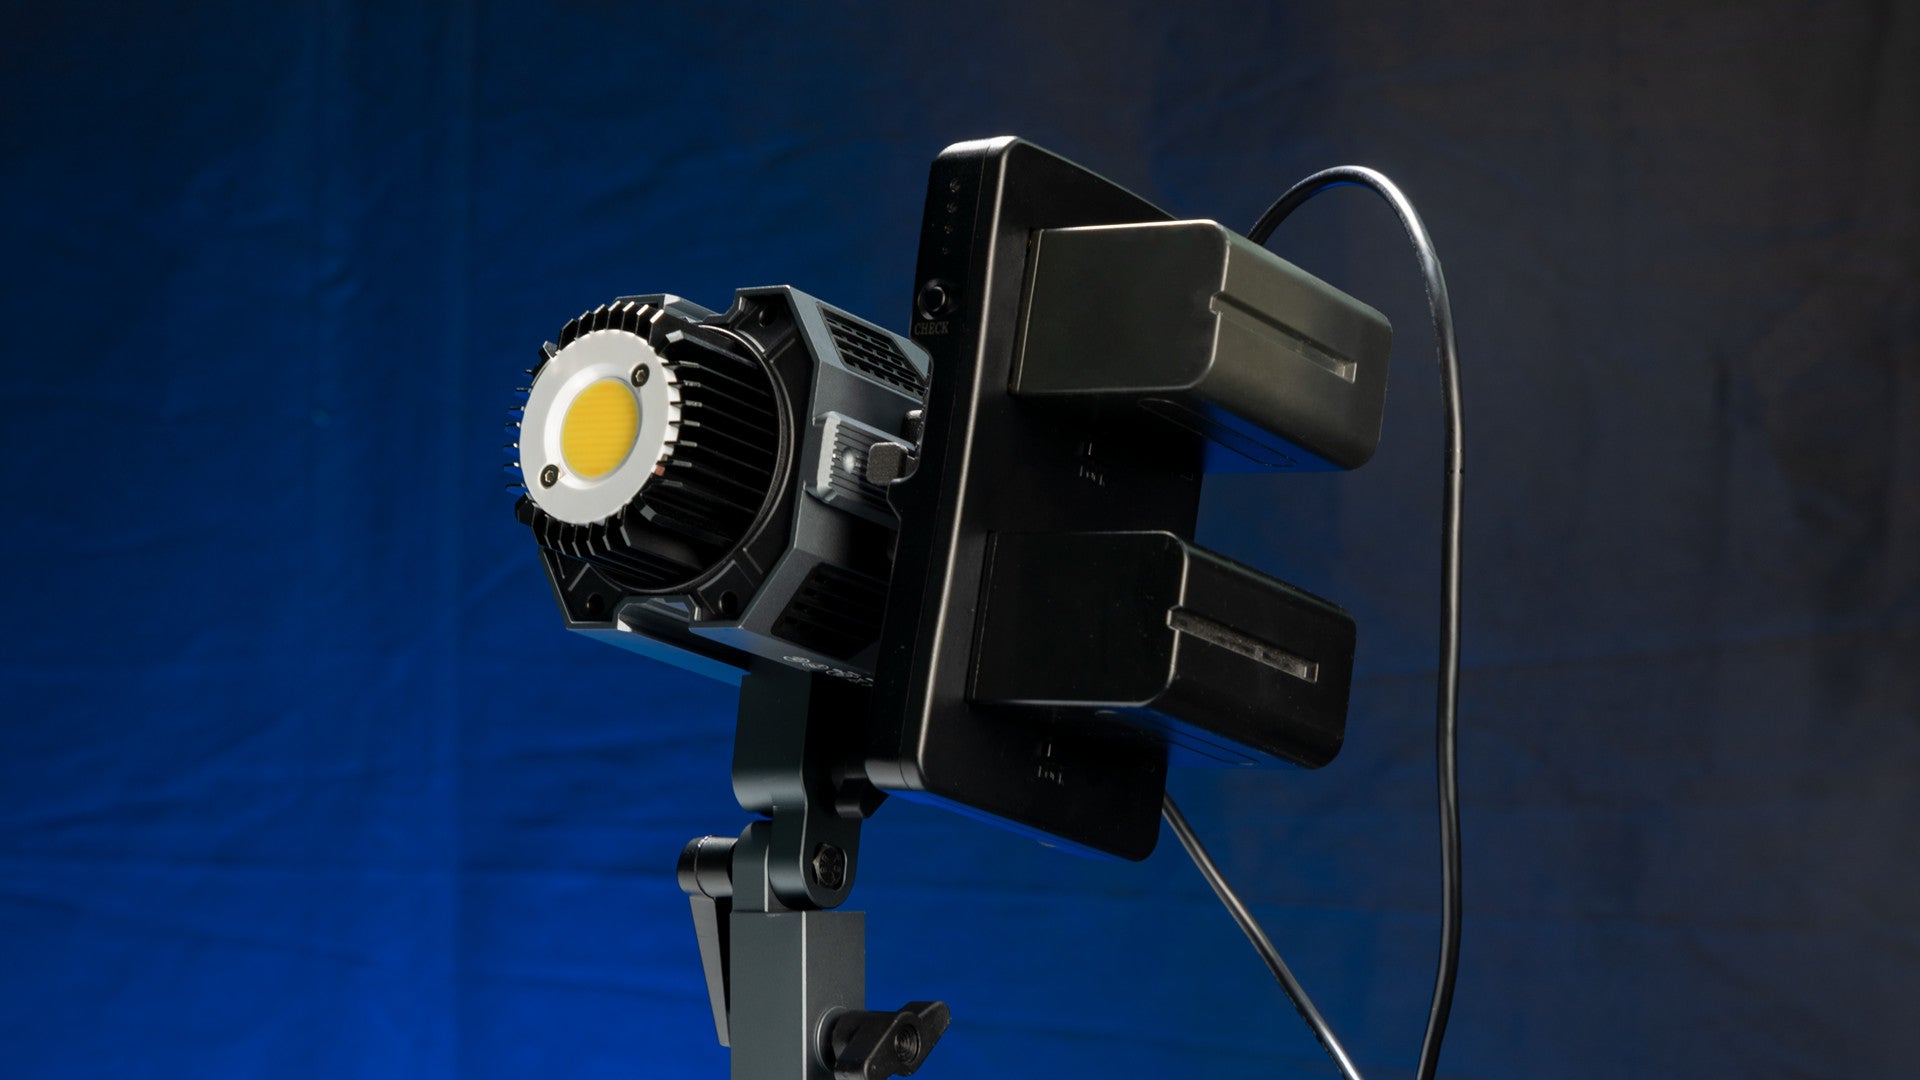 Product review: Get to know COLBOR CL60M lighting for YouTube studio